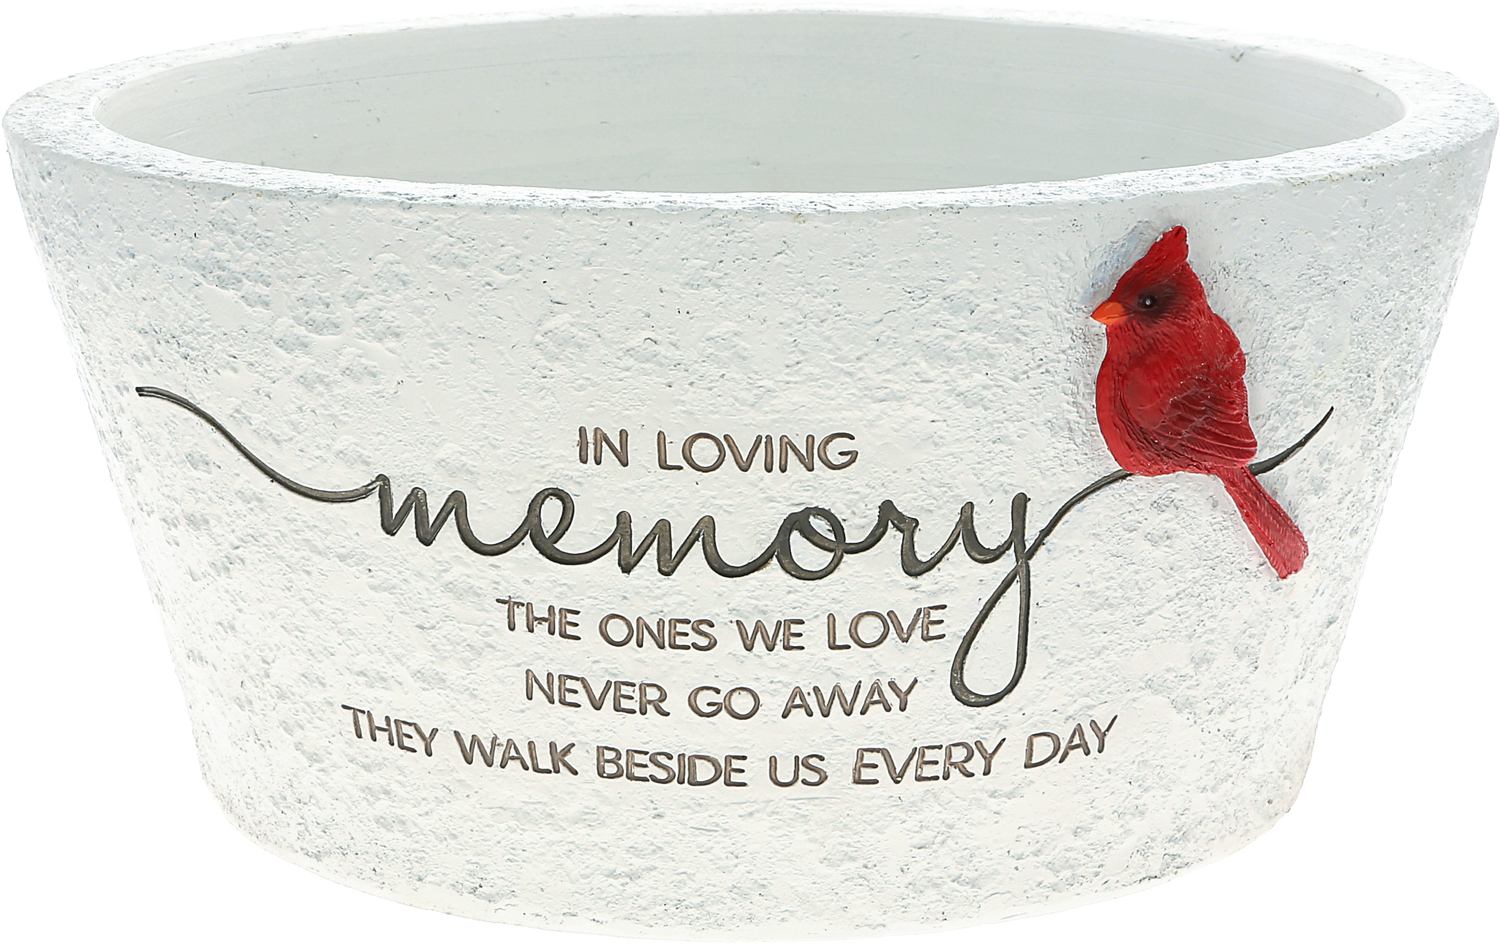 The Ones We Love by Always by Your Side - The Ones We Love - 9.5" X 4.5" Garden Dish